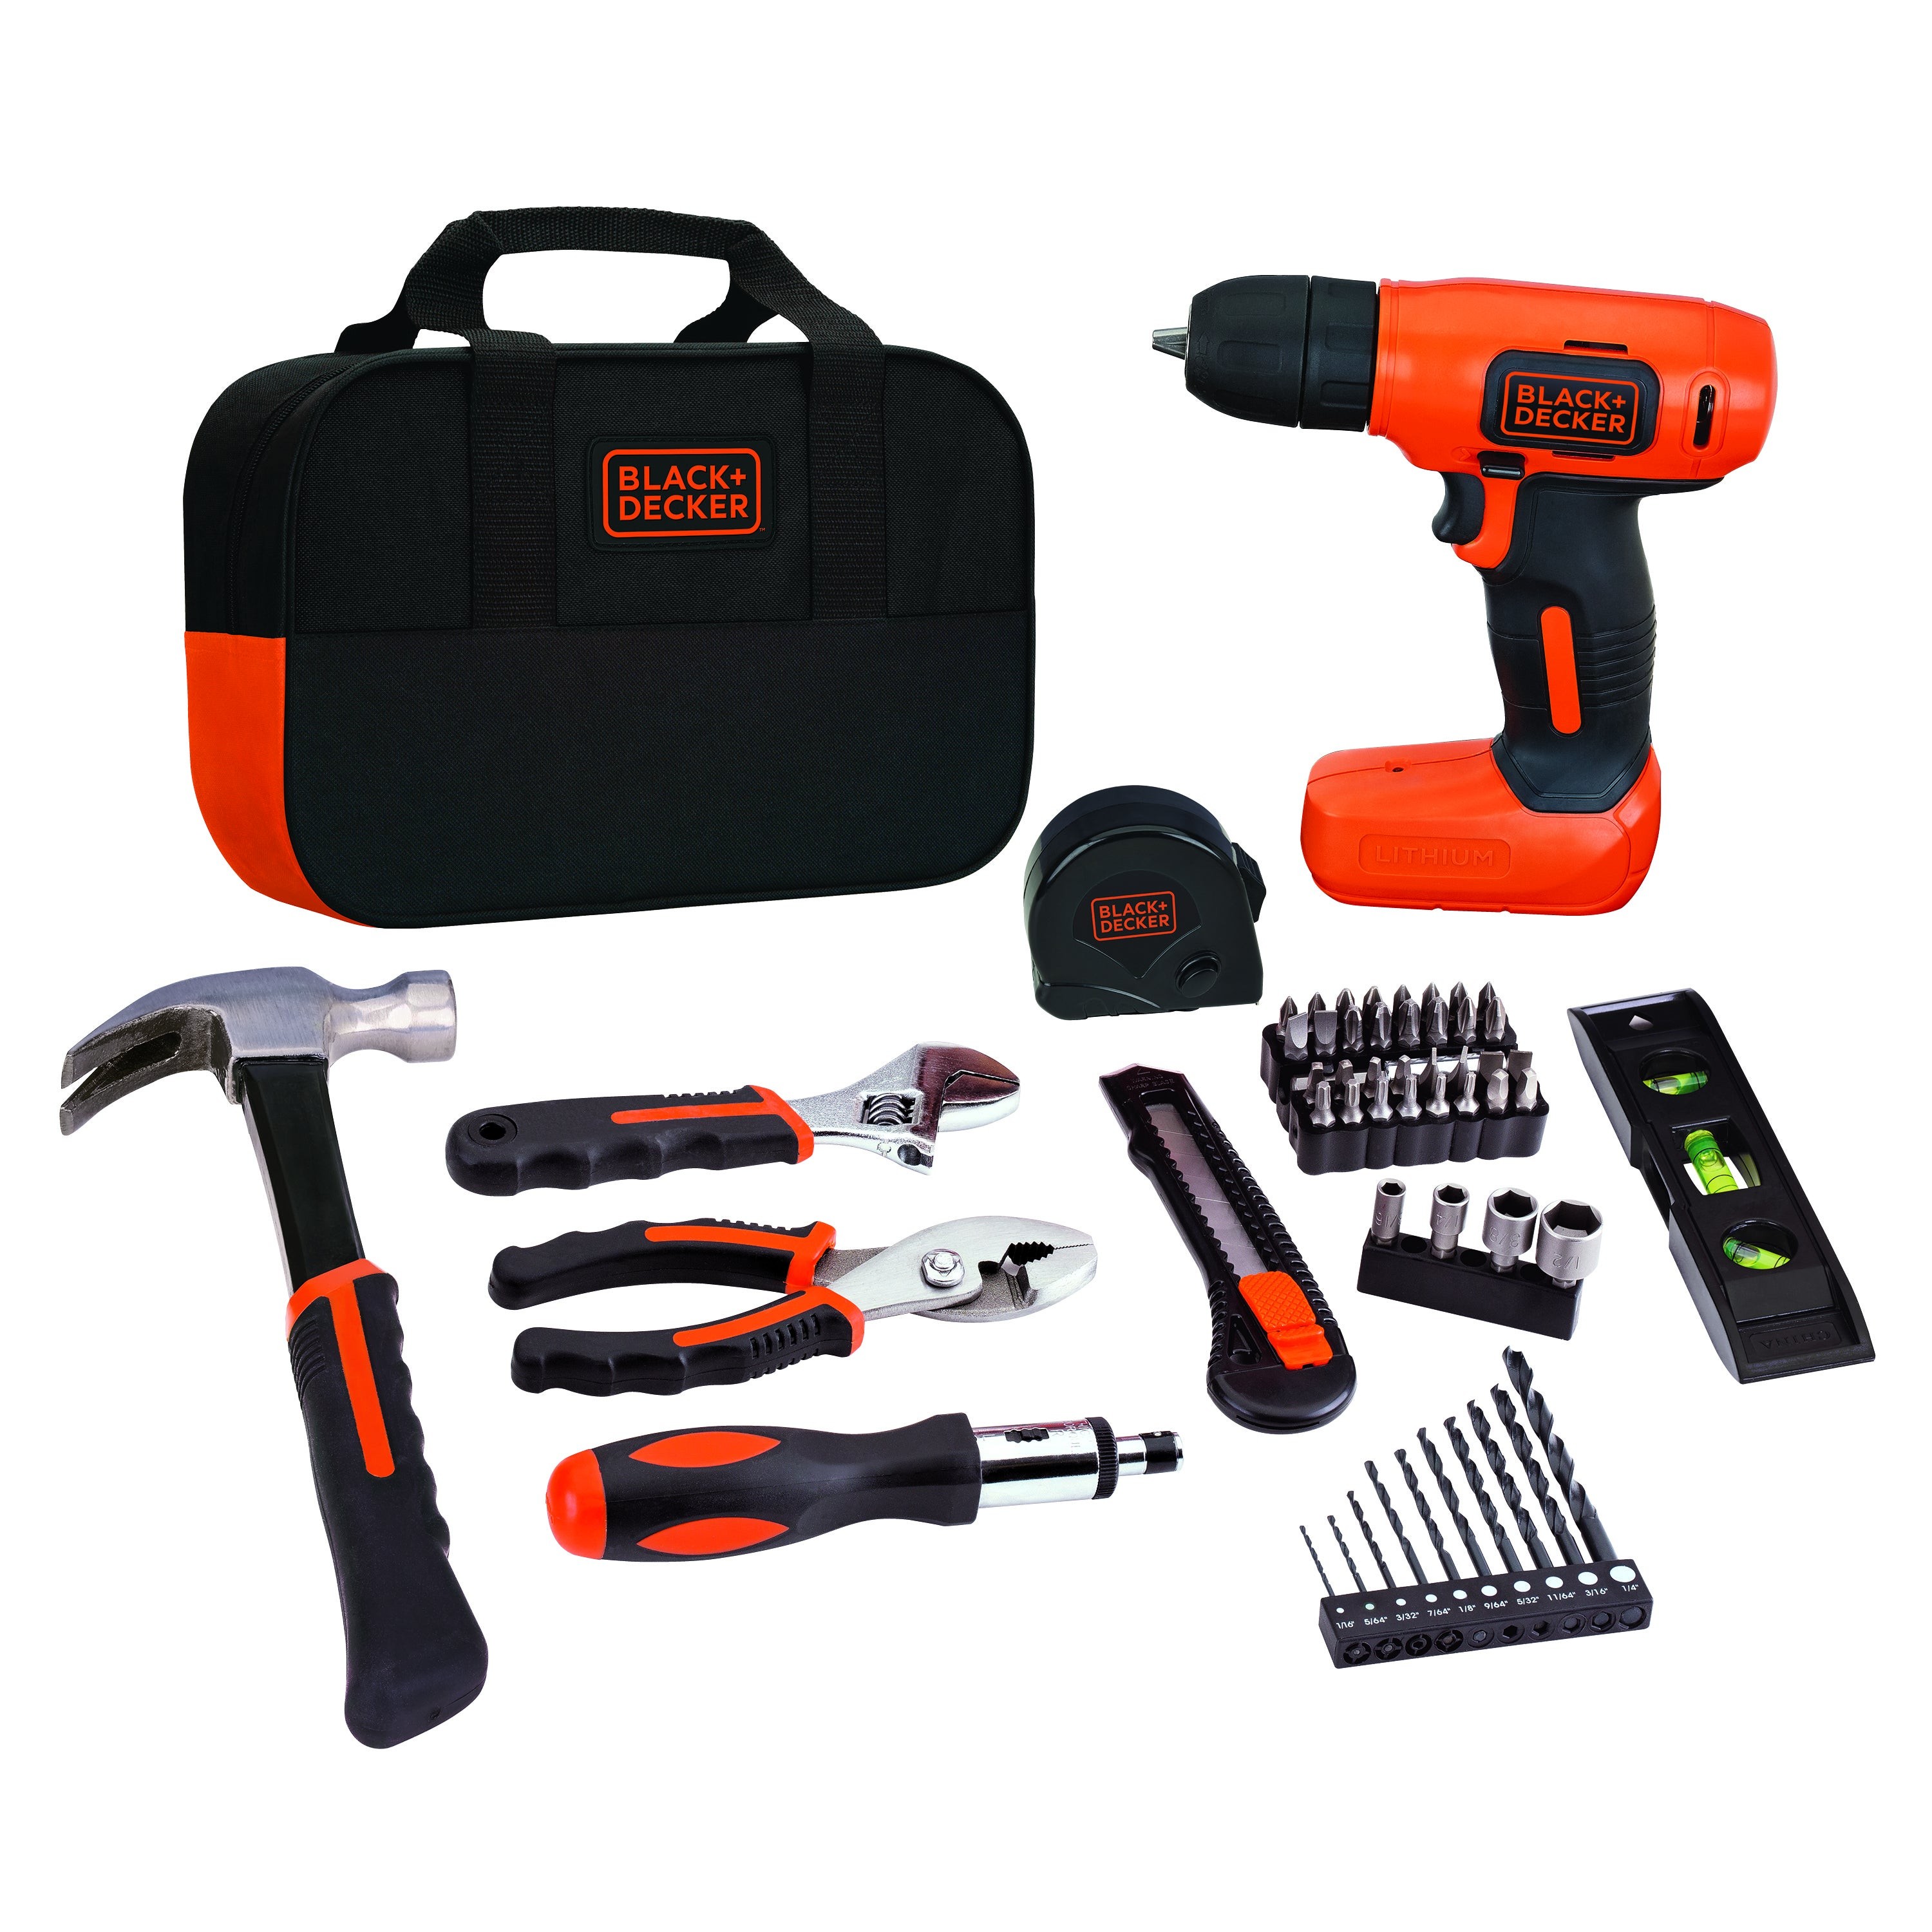 8V MAX Lithium-ion Drill/Driver Project Kit